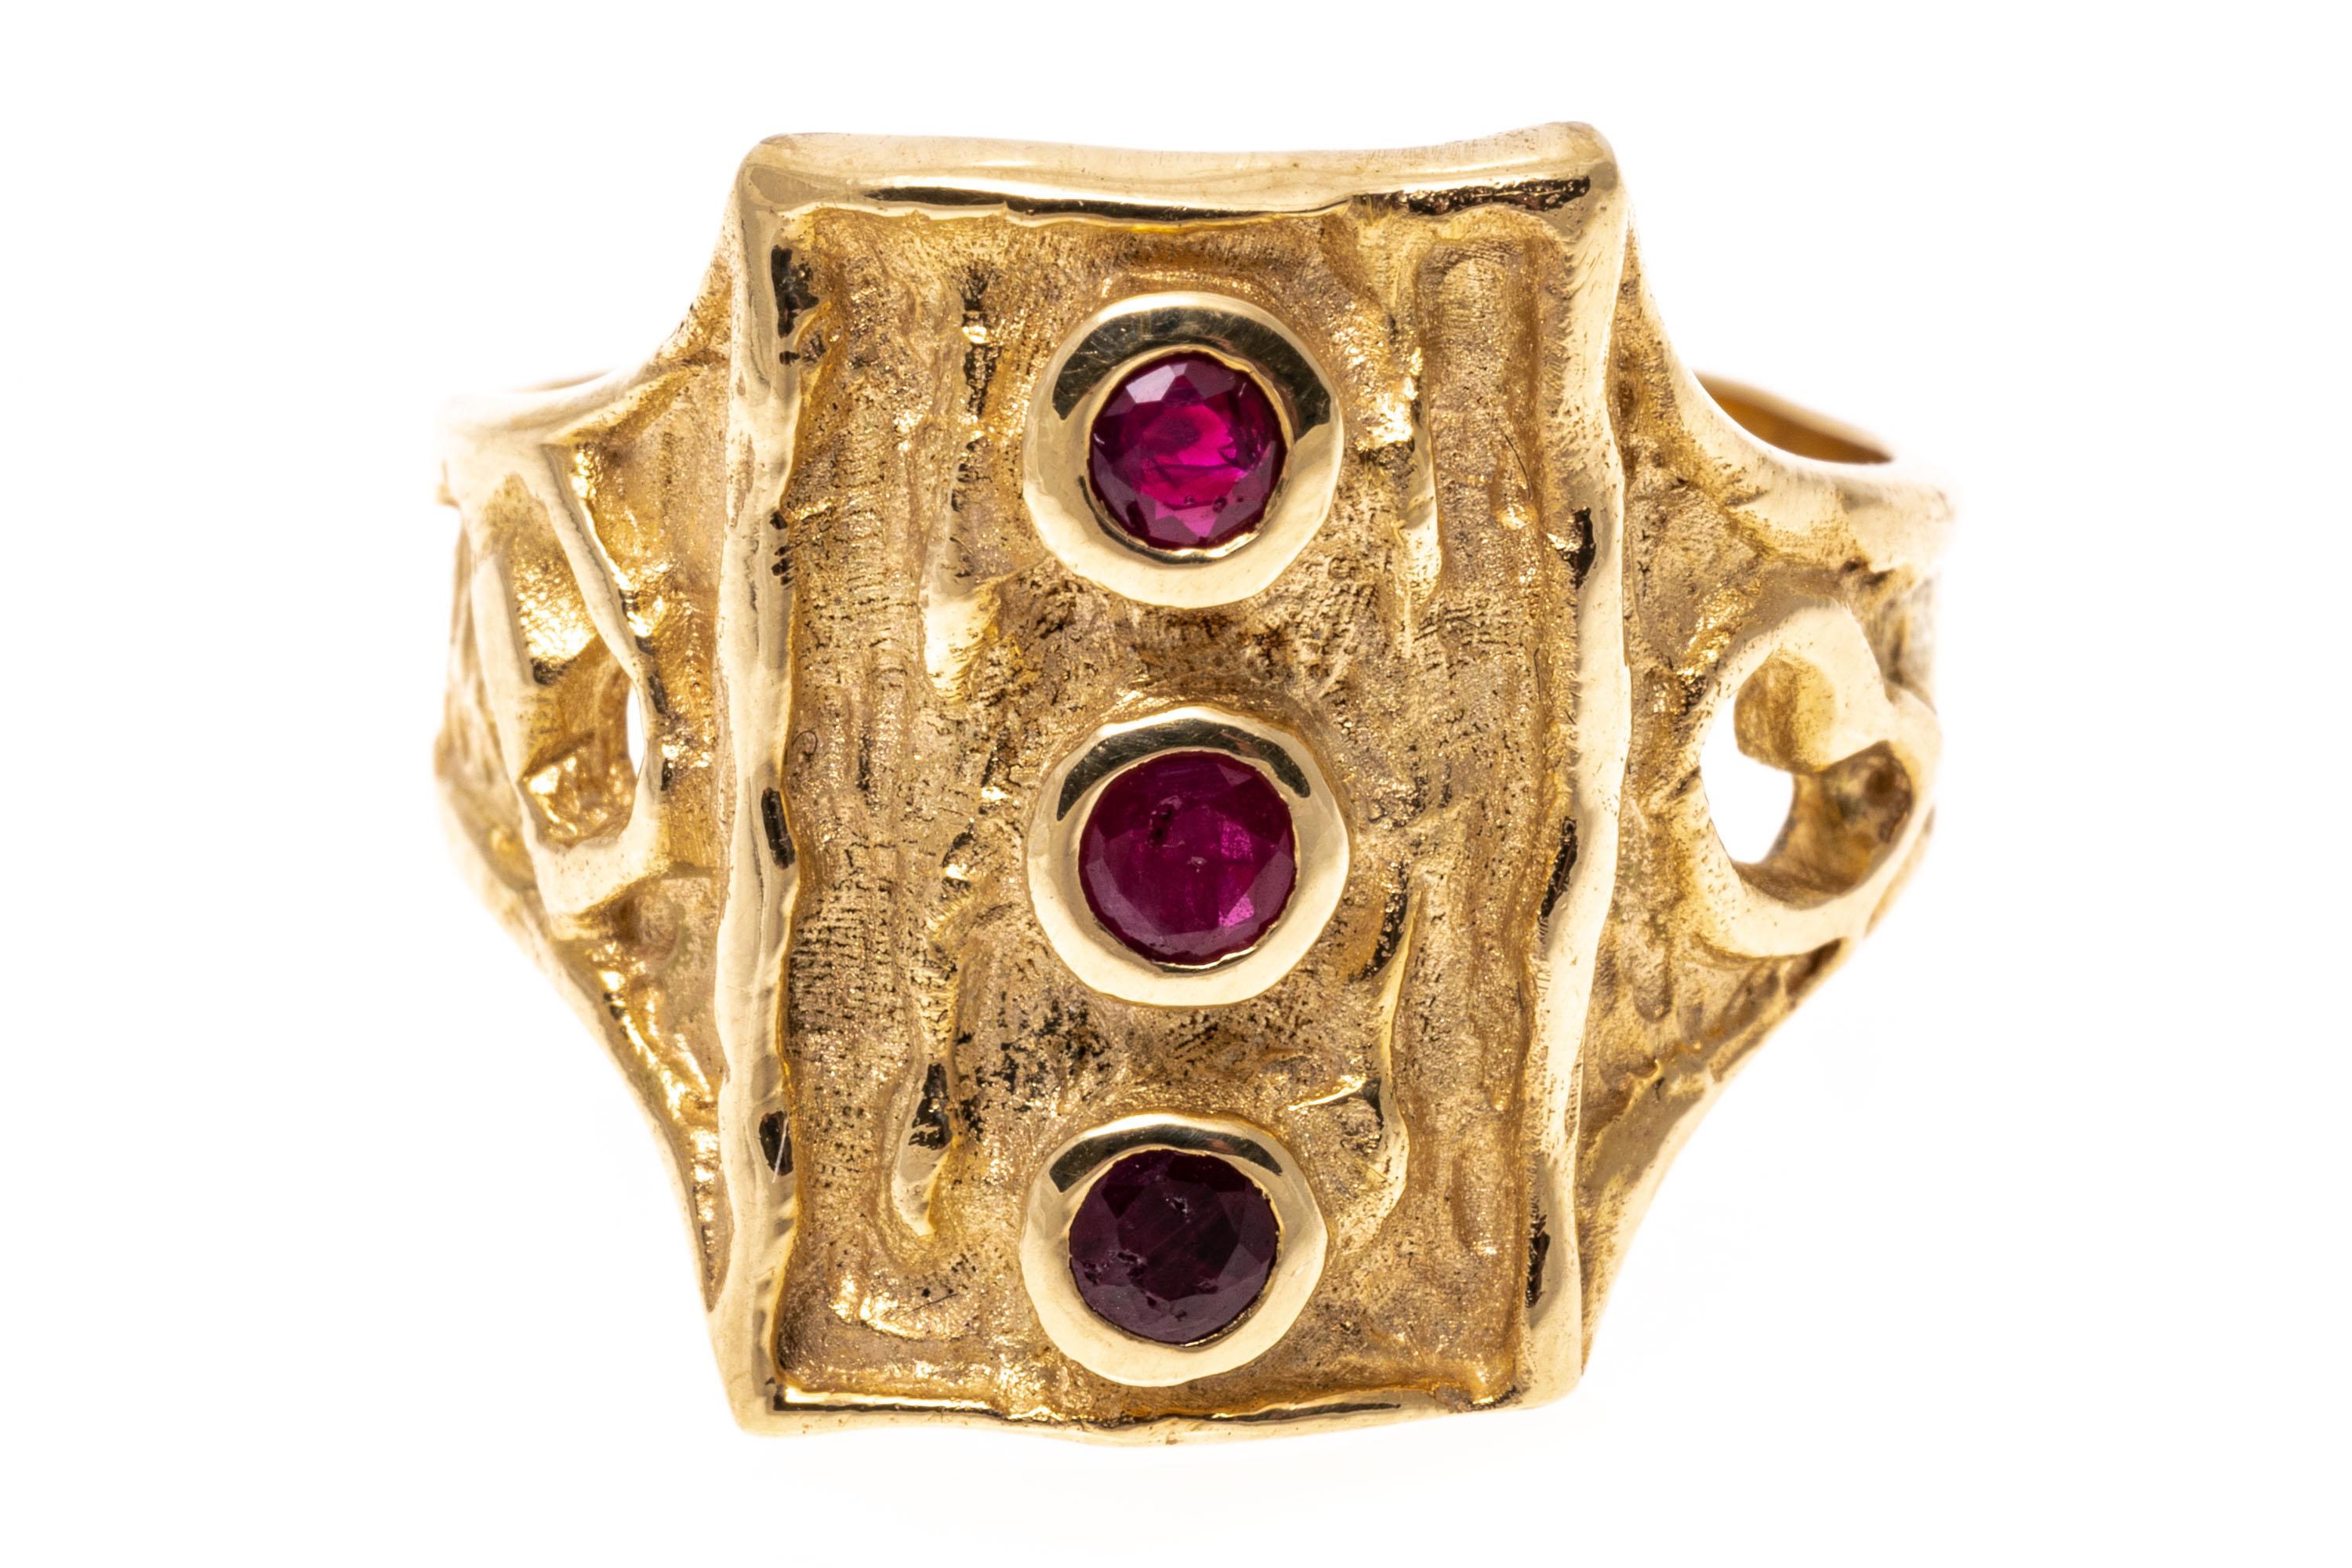 14k Gold Free Form Rectangular Ruby Set Ring With Melted Patterning, Size 7.75 For Sale 1